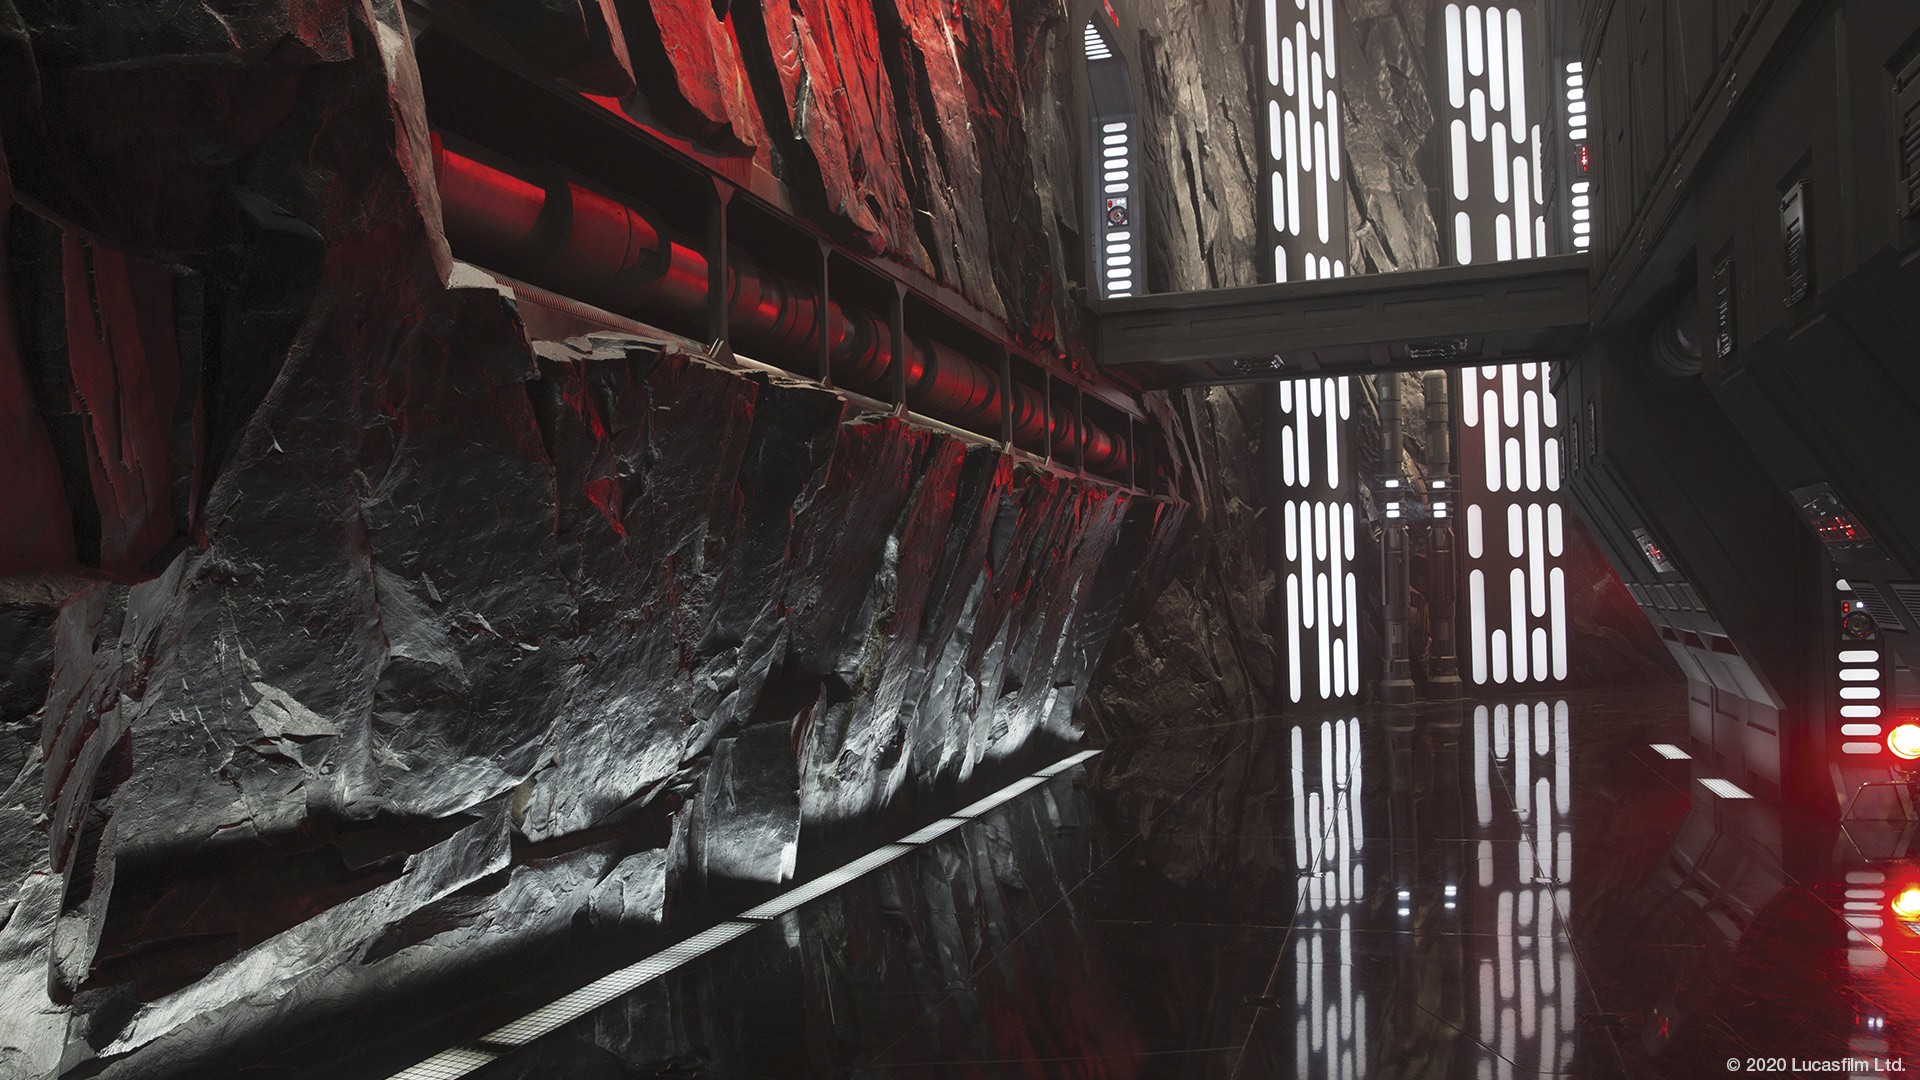 30 Official And Unofficial Star Wars Virtual Backgrounds For Your Next Zoom Meeting